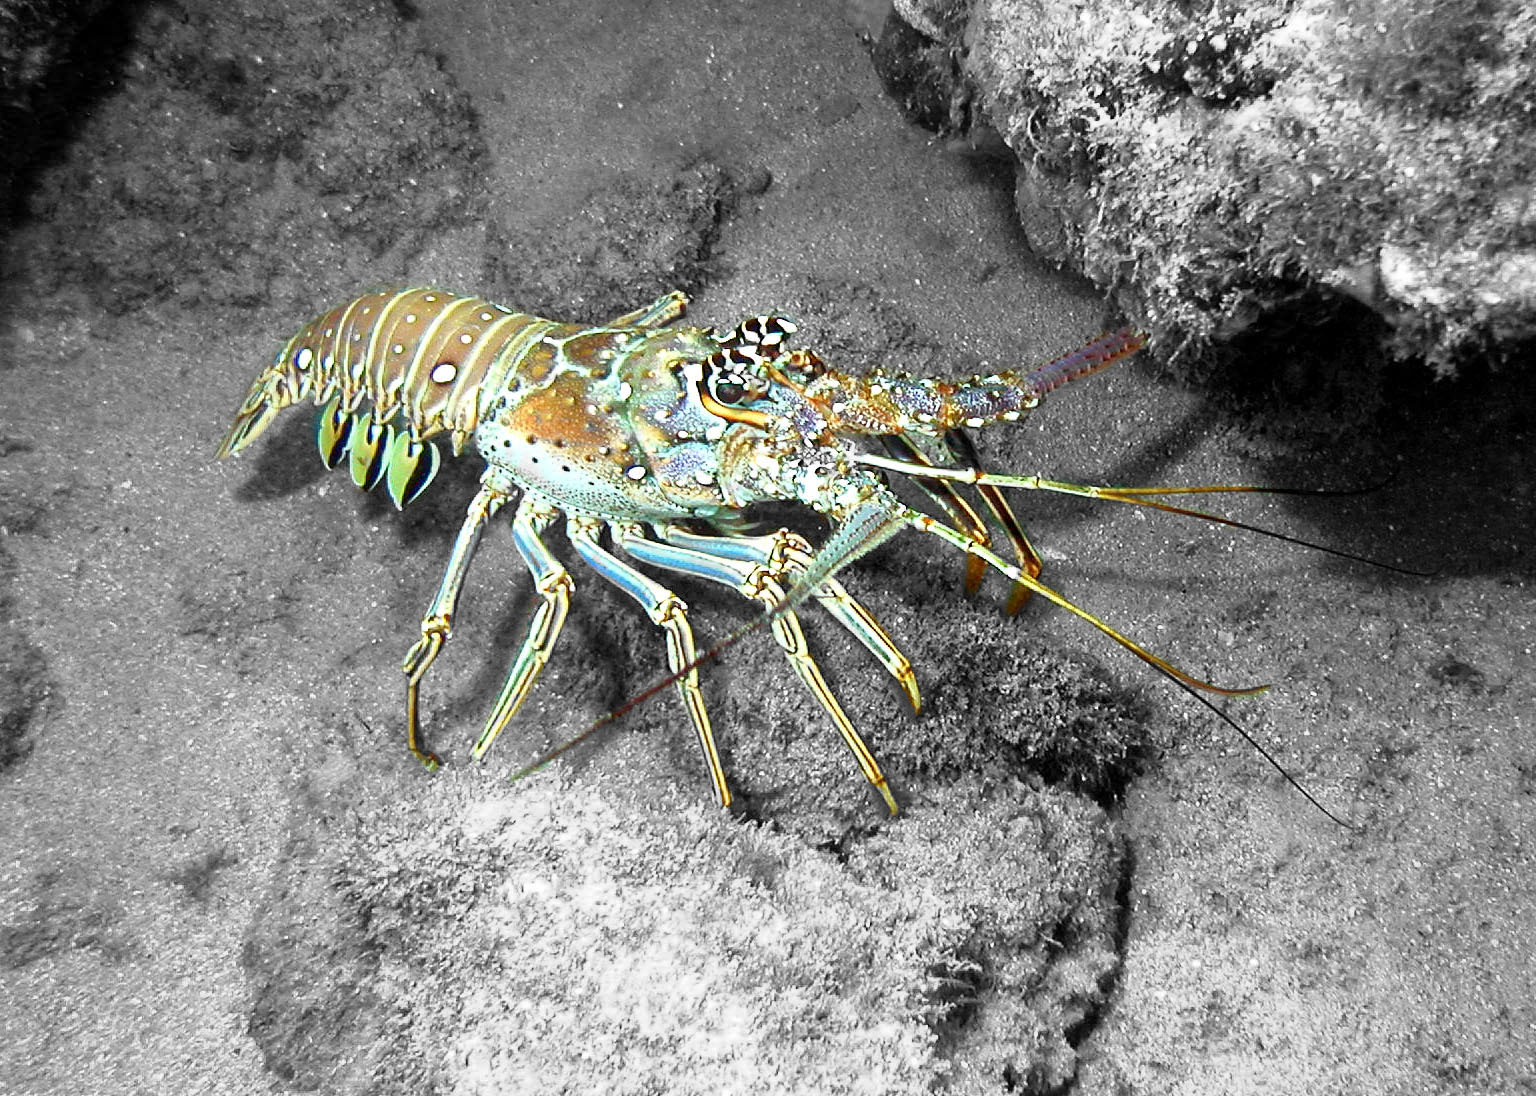 Photoshoped Spiney Lobster